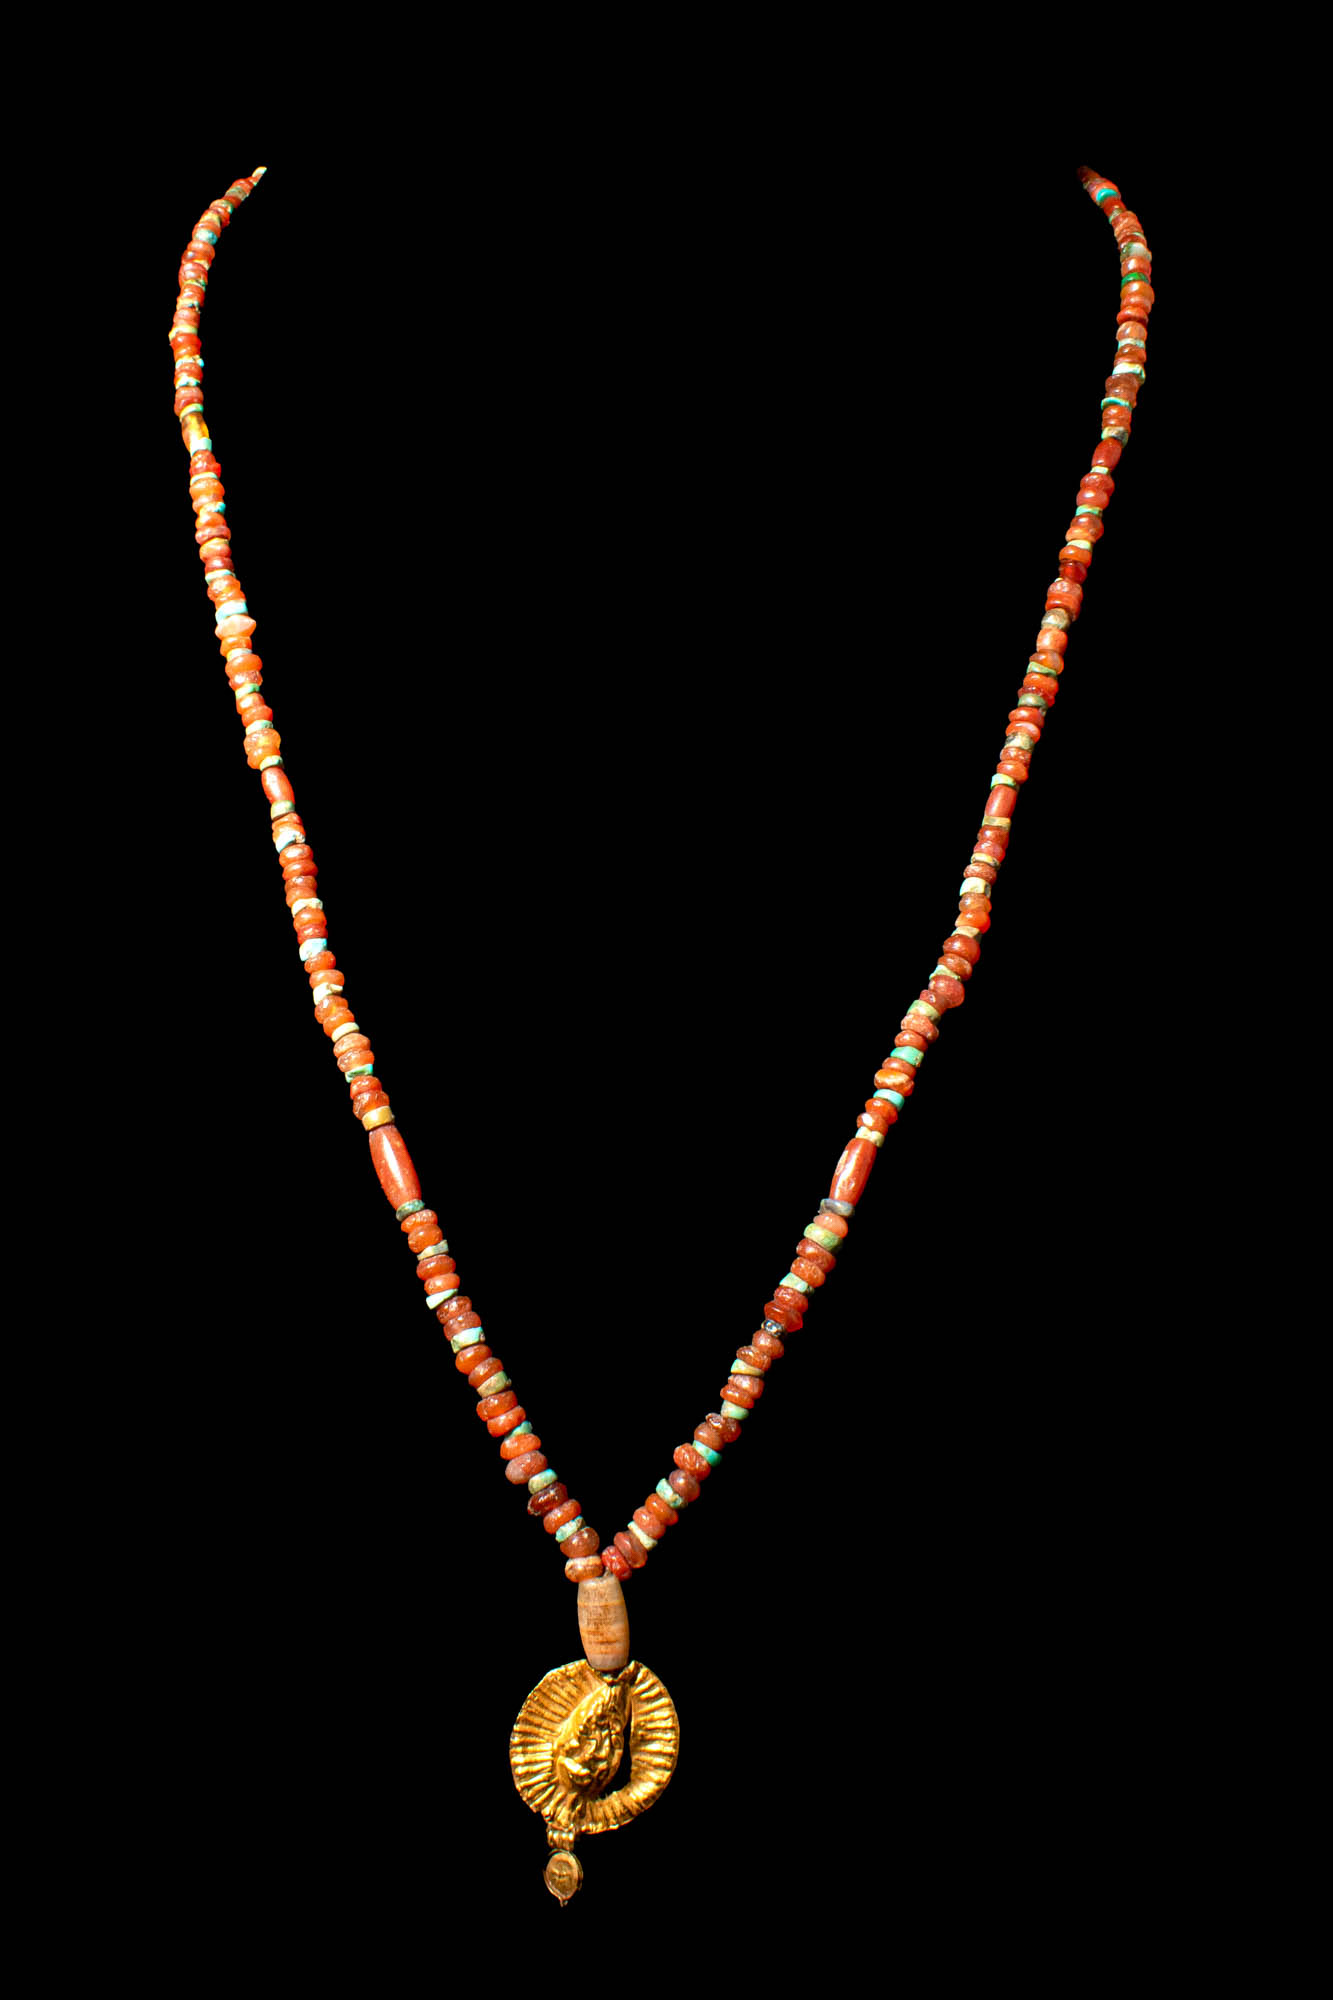 PTOLEMAIC PERIOD CARNELIAN NECKLACE WITH GOLD PENDANT - Image 2 of 8